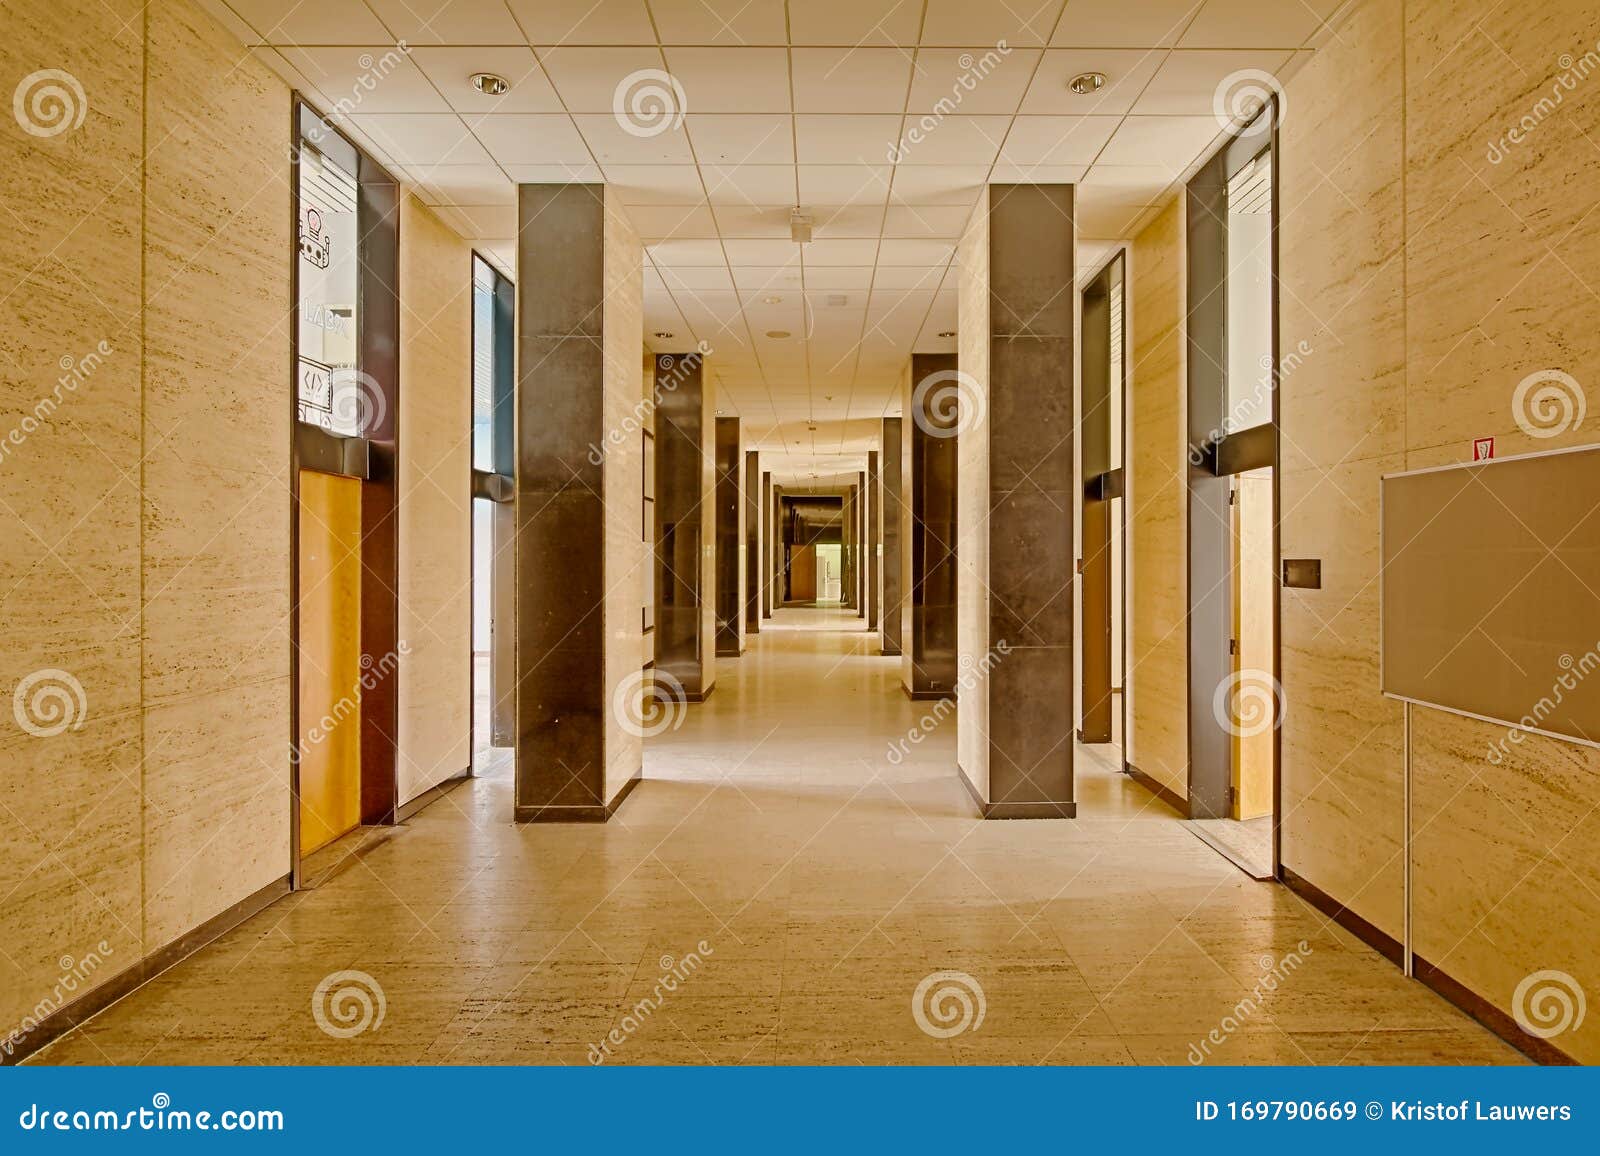 Fancy Hallway of an Office Building, with Walls in Marble and Pilars in  Shine Black Granite Editorial Stock Image - Image of granite, lines:  169790669